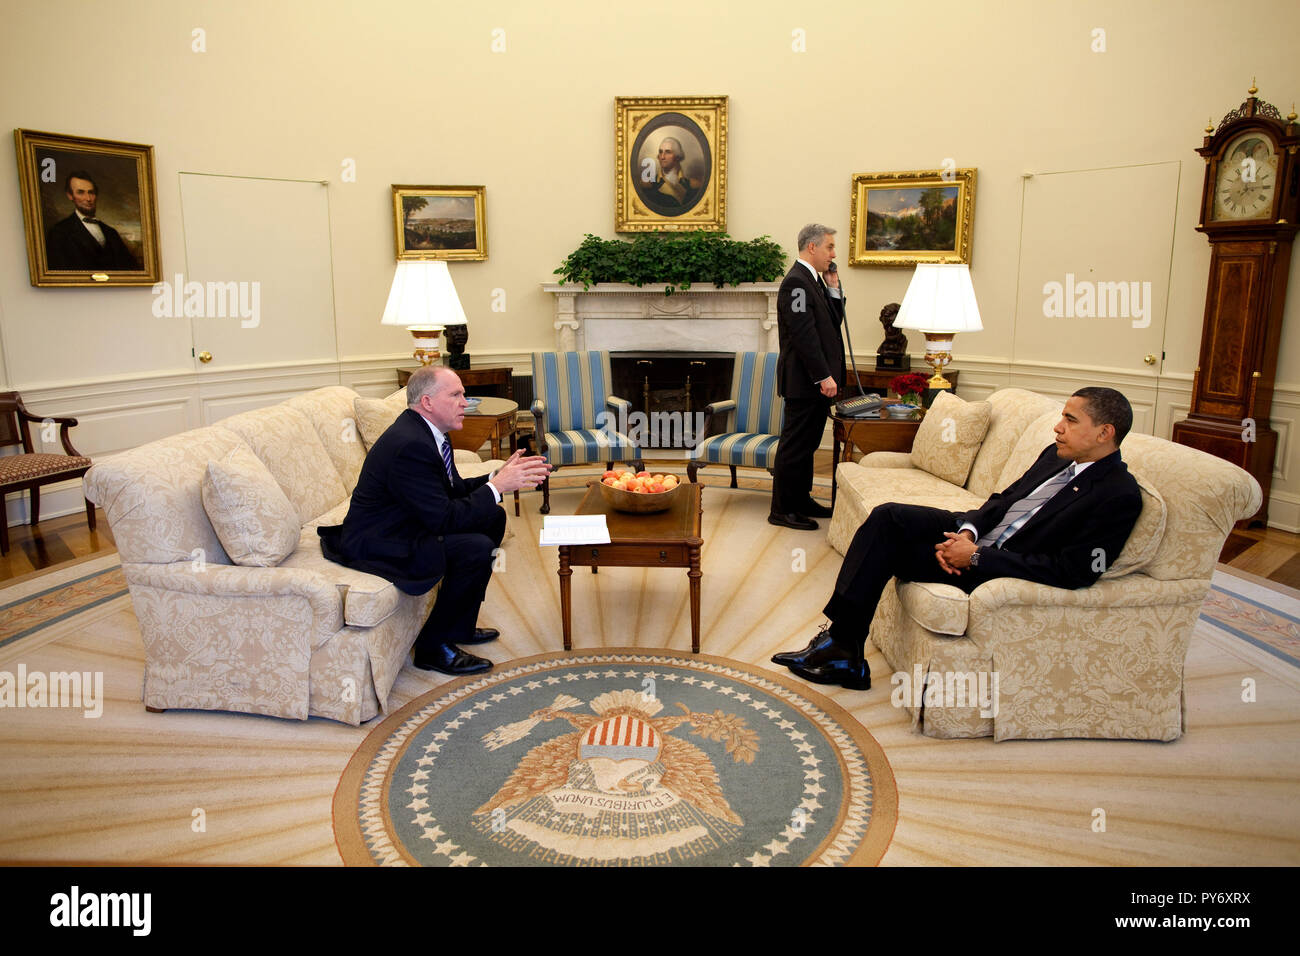 President Barack Obama talks with John Brennan, assistant to the President for Homeland Security,  while a National Security Council staff member places a call to a foreign leader in the Oval Offie May 7, 2009.  Official White House Photo by Pete Souza. This official White House photograph is being made available for publication by news organizations and/or for personal use printing by the subject(s) of the photograph. The photograph may not be manipulated in any way or used in materials, advertisements, products, or promotions that in any way suggest approval or endorsement of the President,  Stock Photo